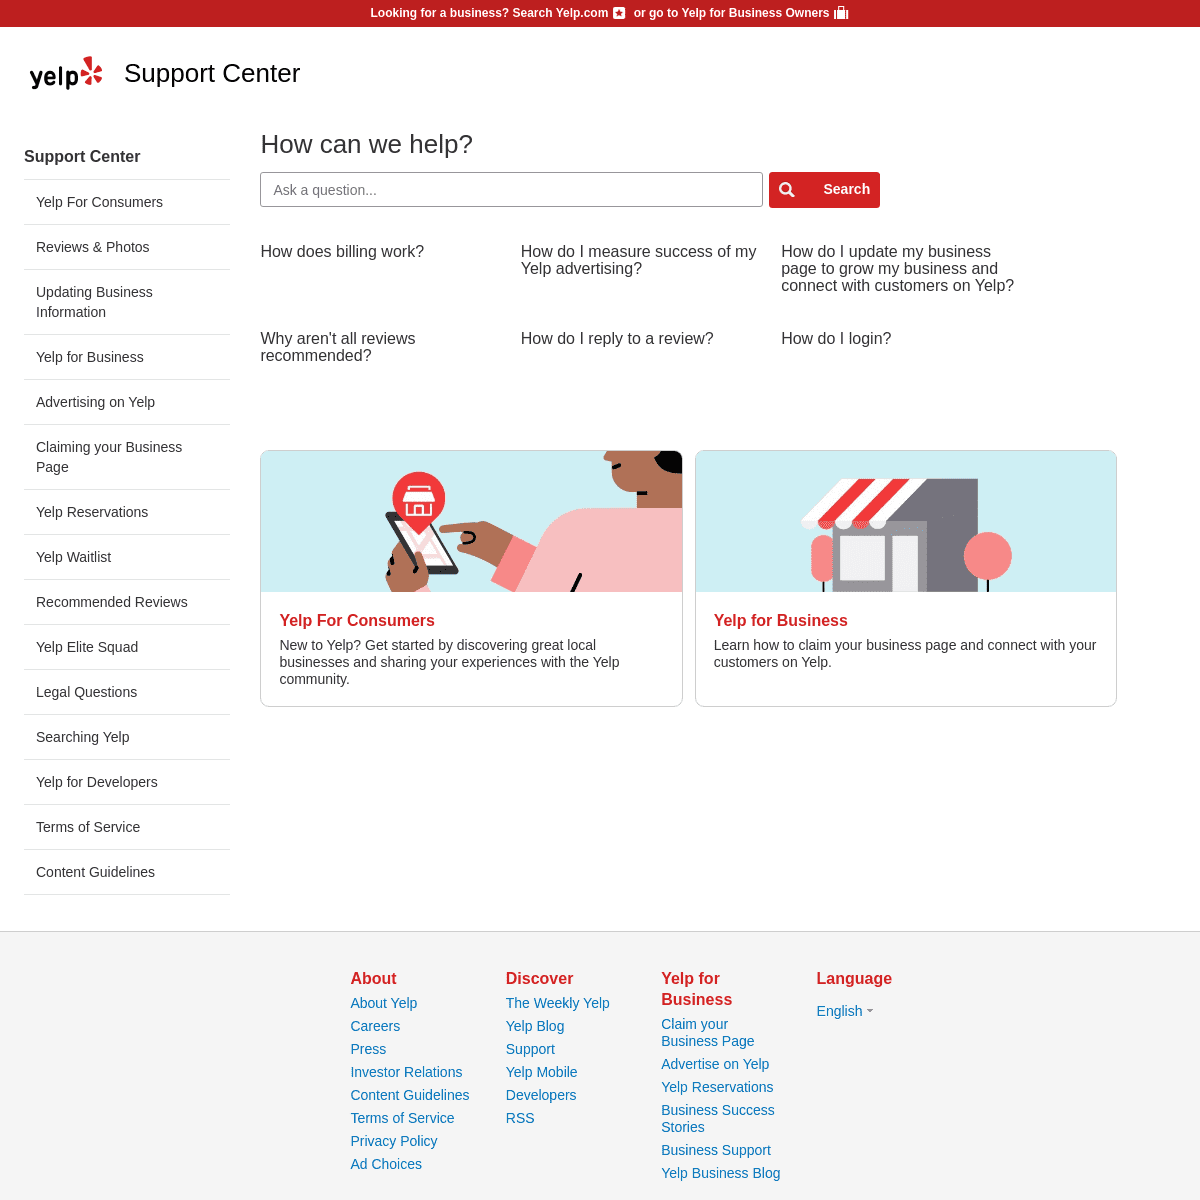 A complete backup of https://yelp-support.com